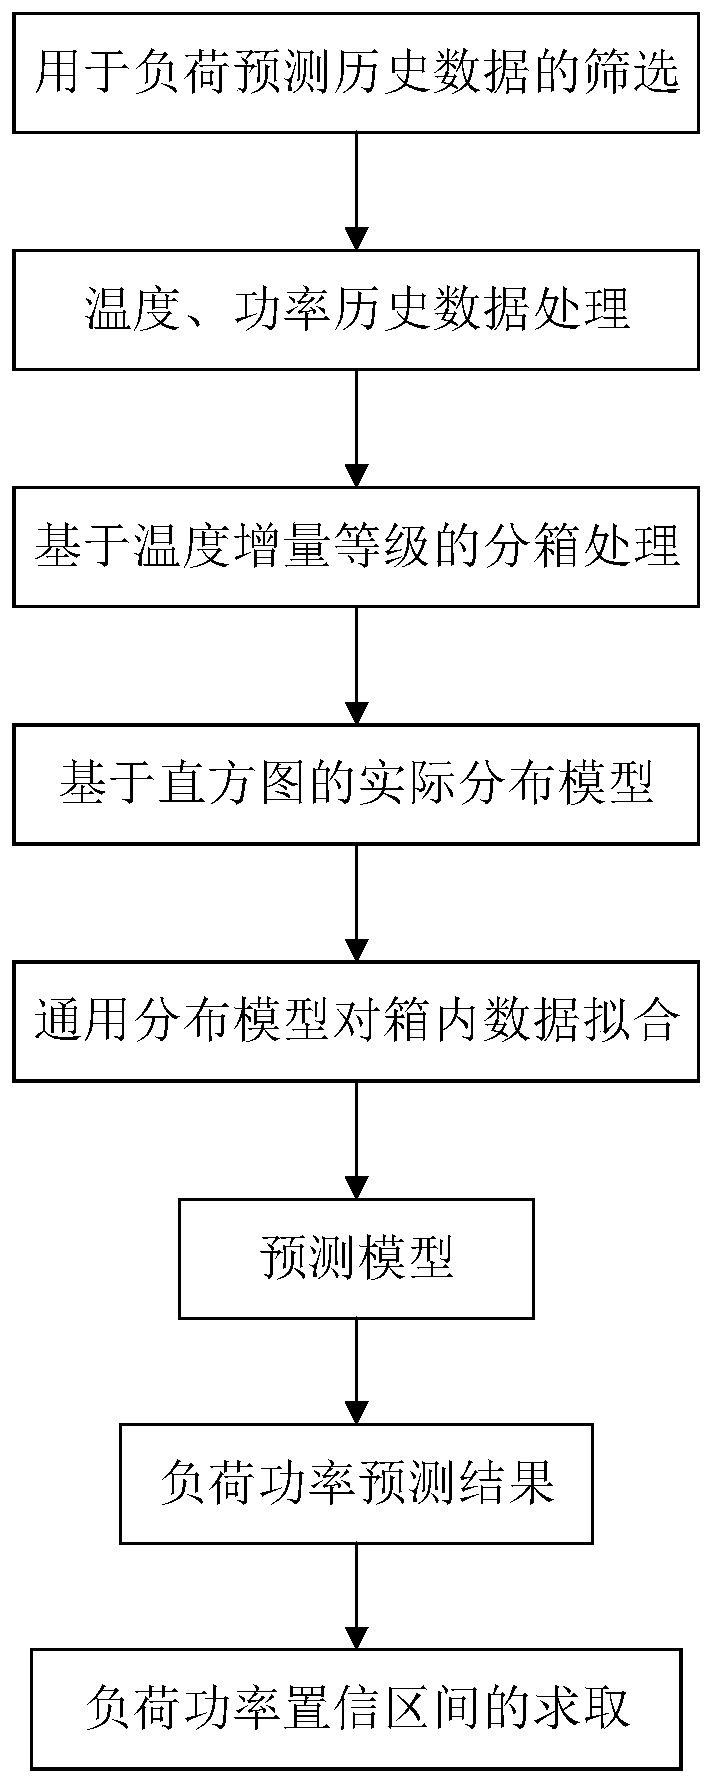 Load prediction method and load prediction system based on general distribution